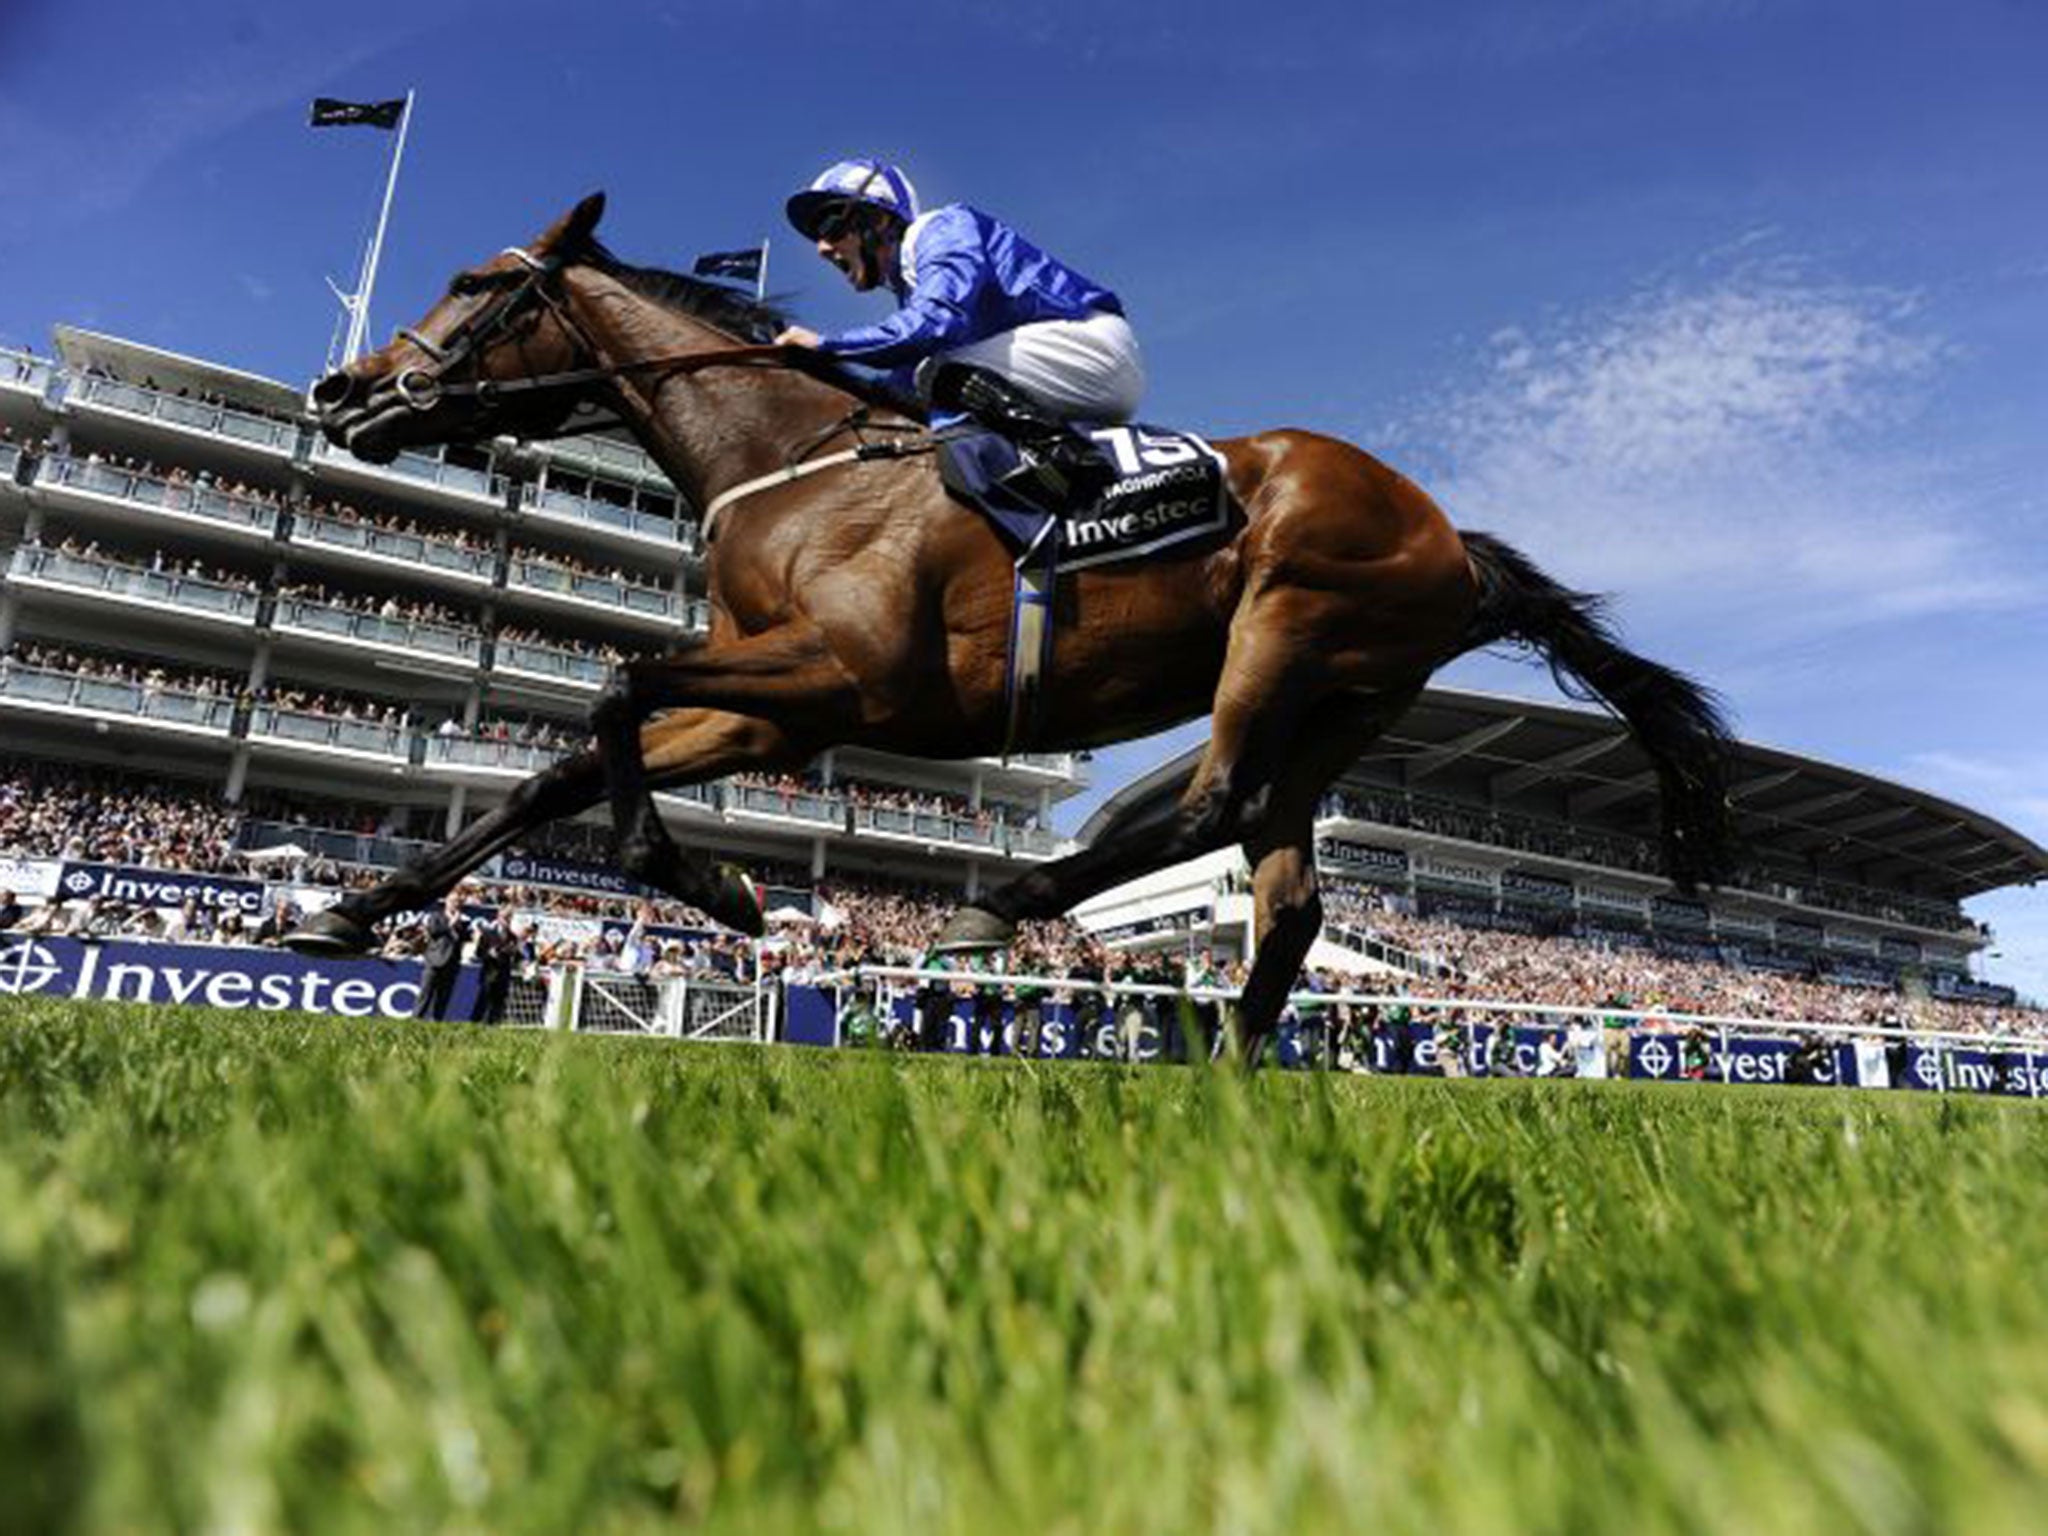 Riding high: Experienced jockey Paul Hanagan and the feisty Taghrooda storm to victory in this year’s Derby